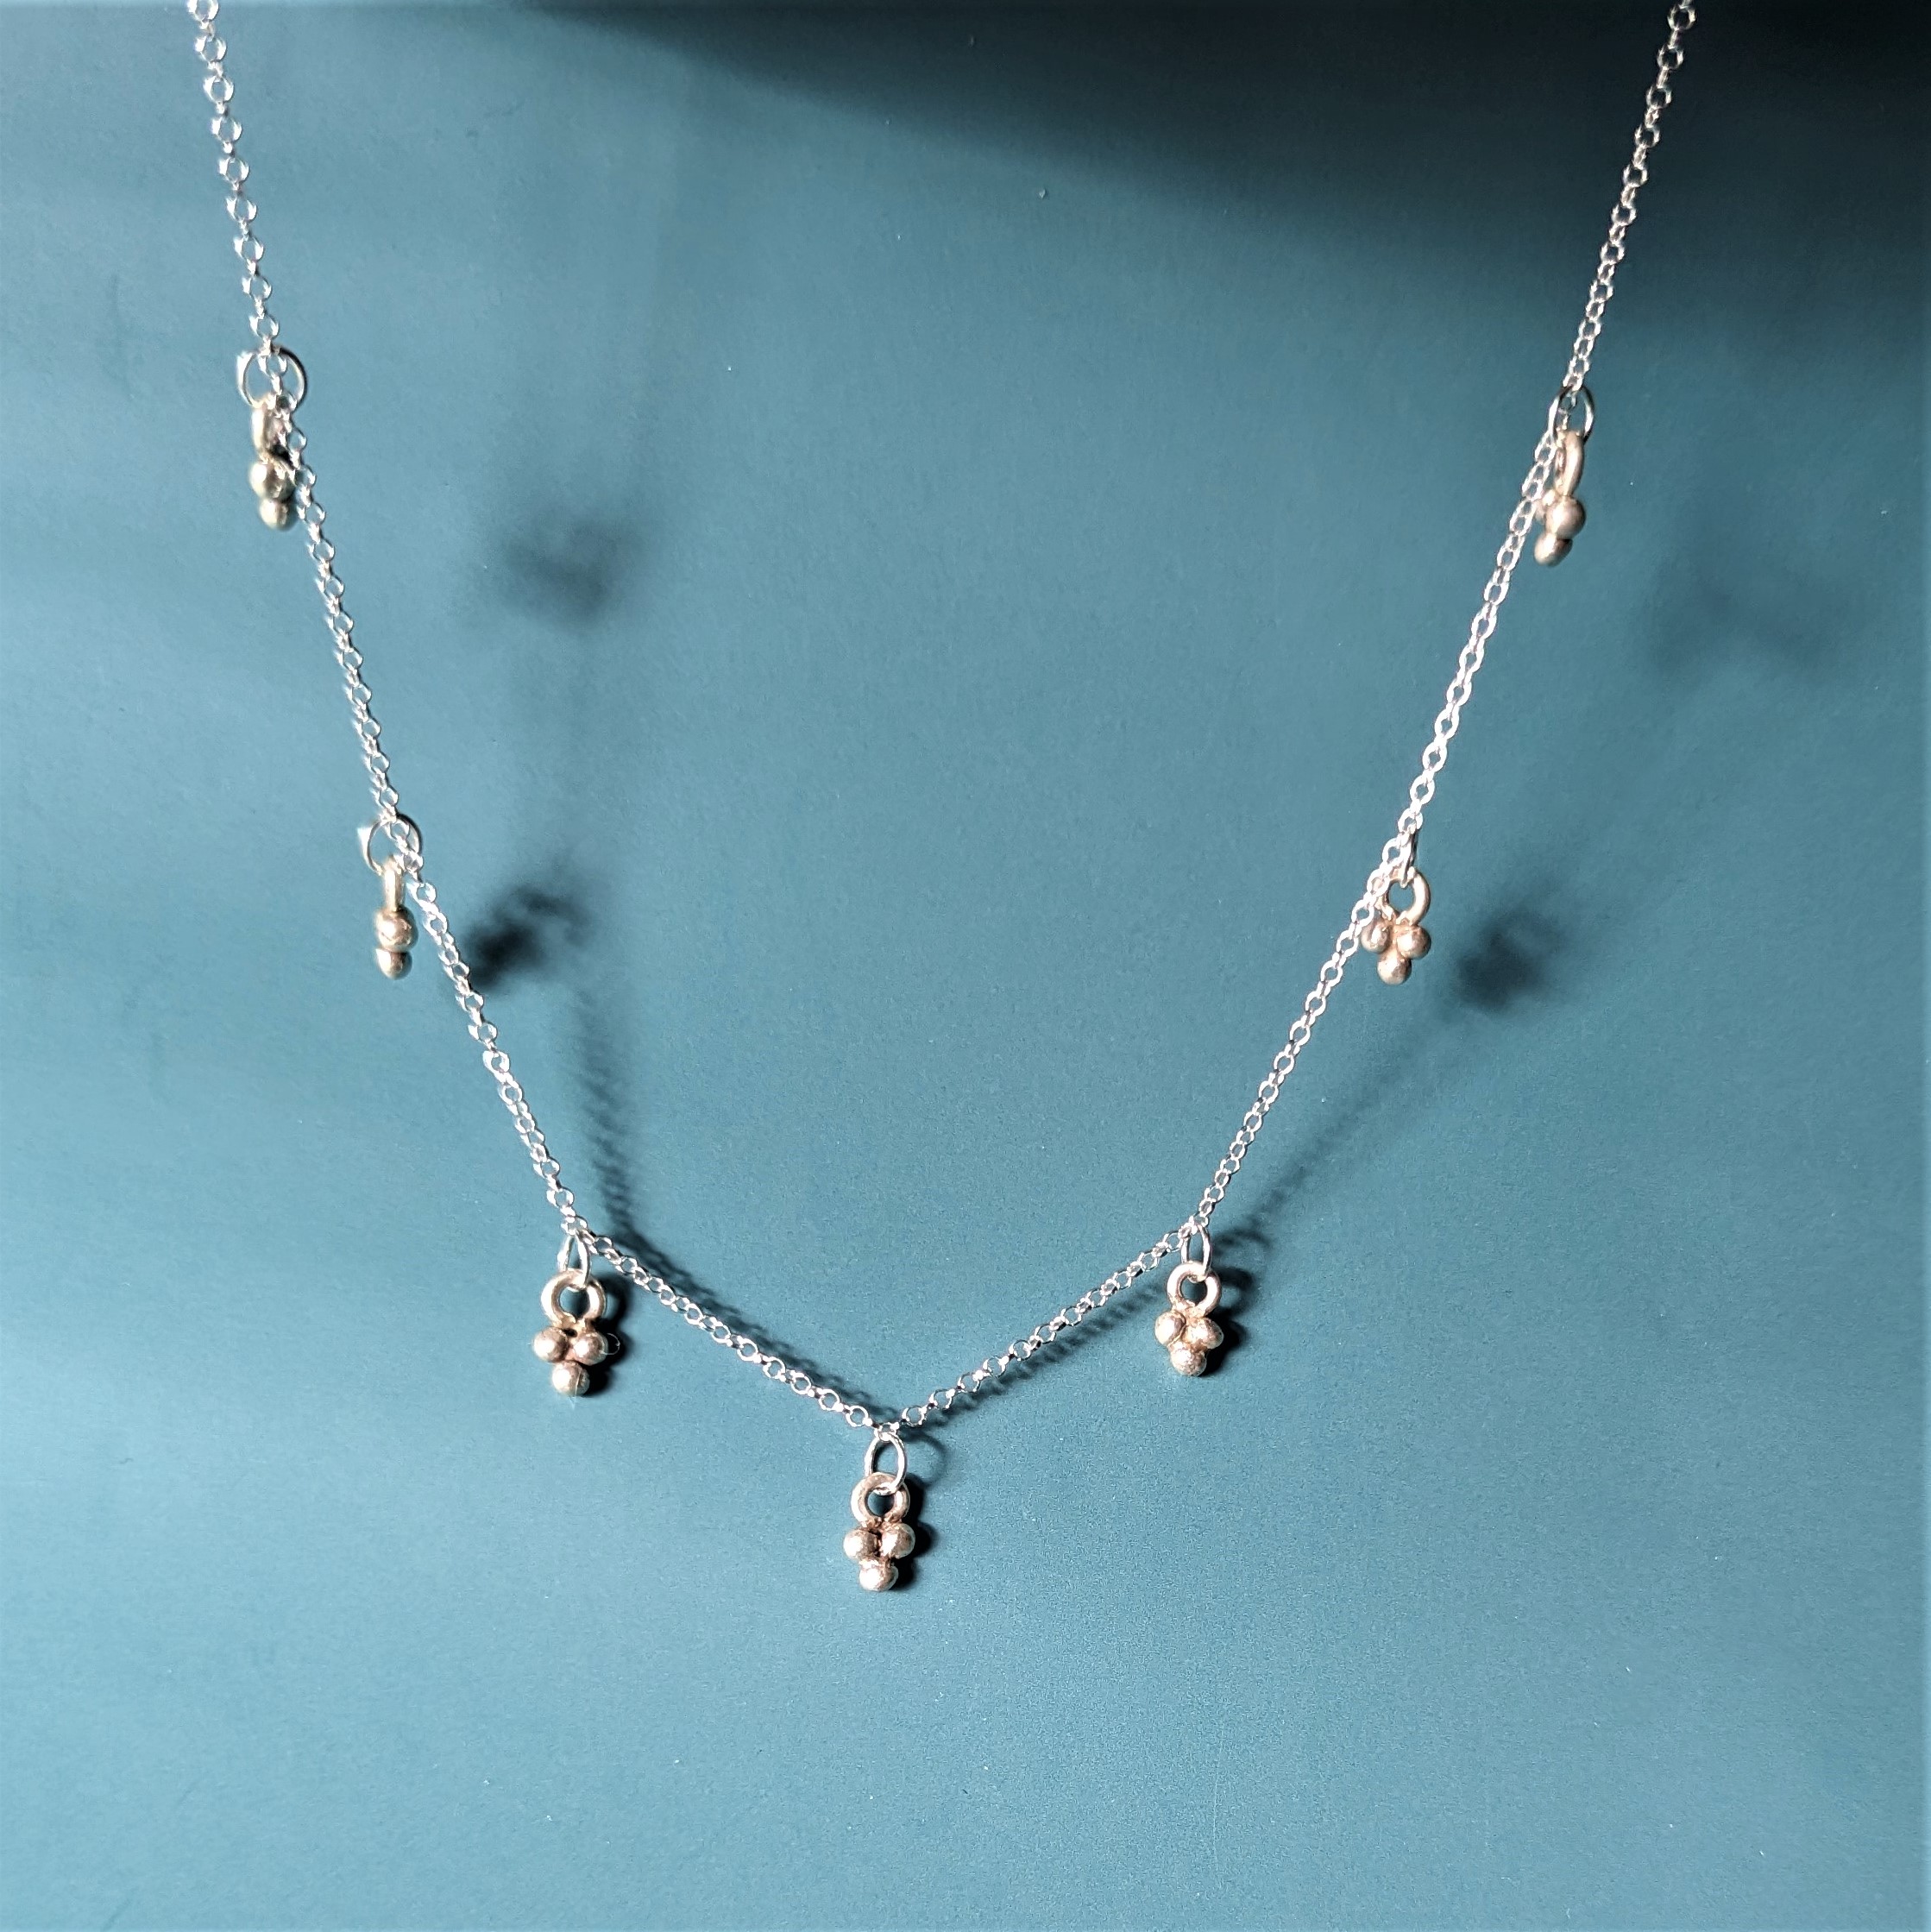 N112 Celeste Necklace. A sterling silver chain holds seven tiny ball cluster charms which are interspaced along the chain. Fair Trade and ethically handmade.